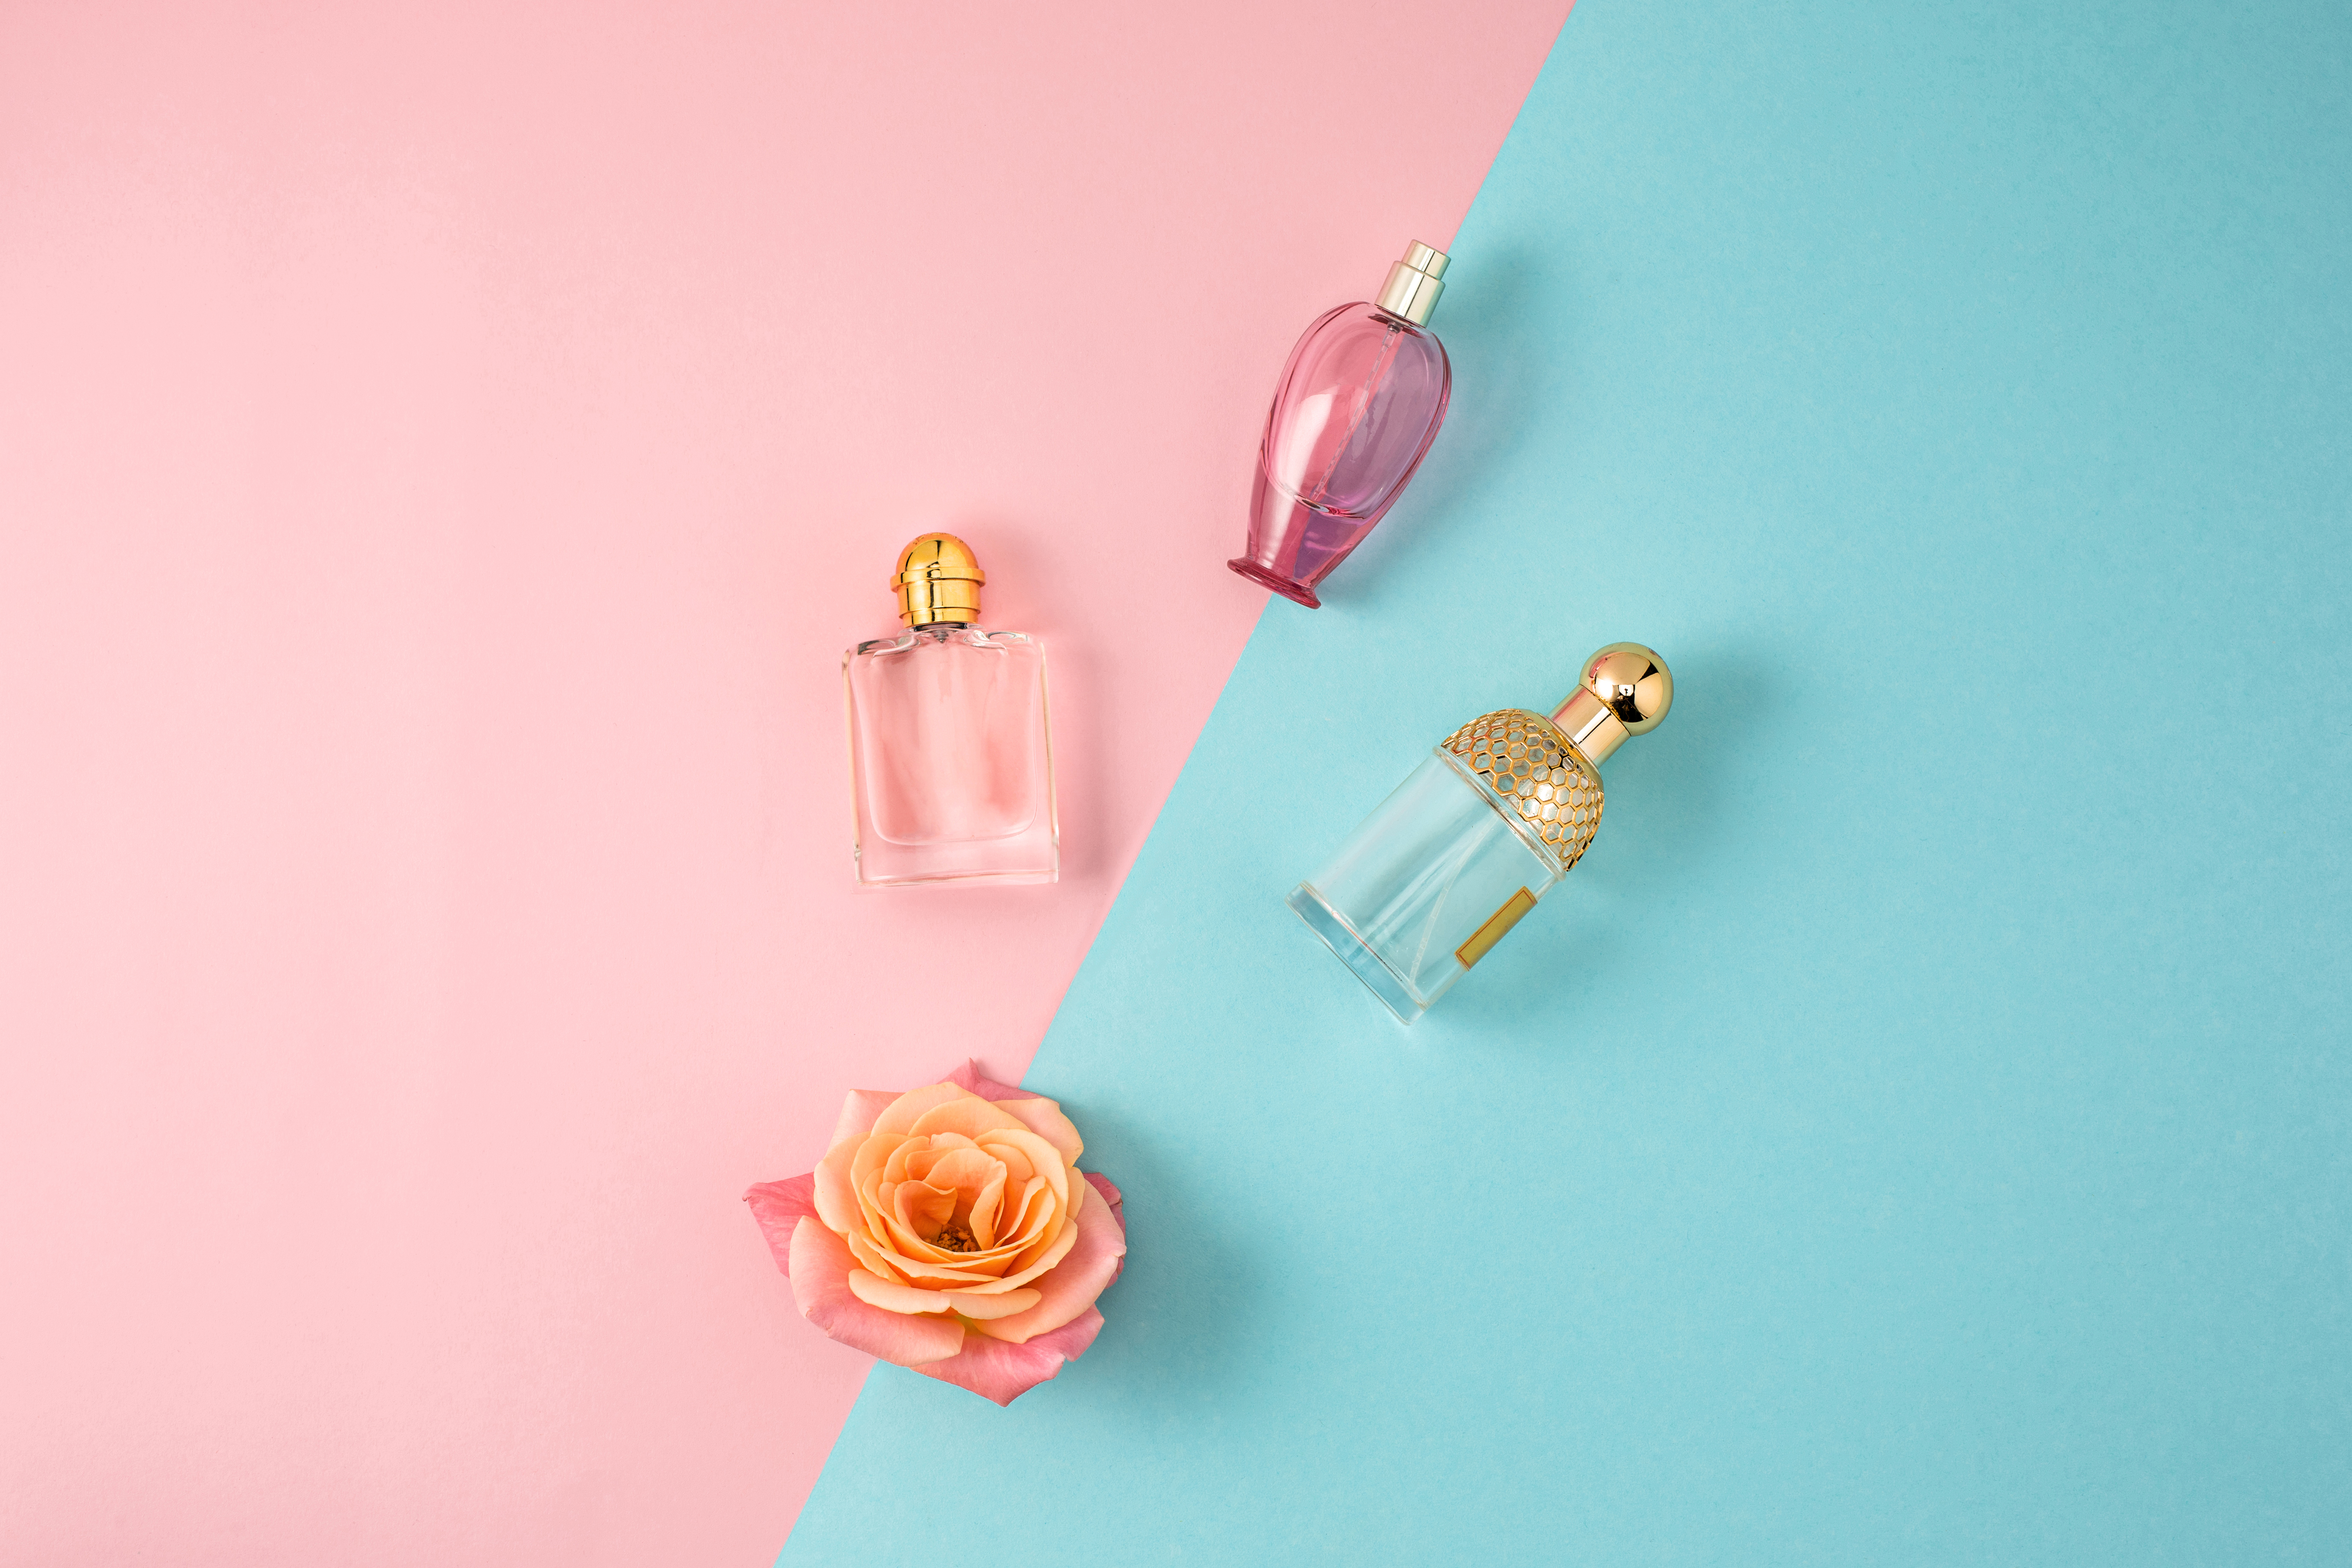 Cosmetics - Perfume on colorful backgroundb with rose